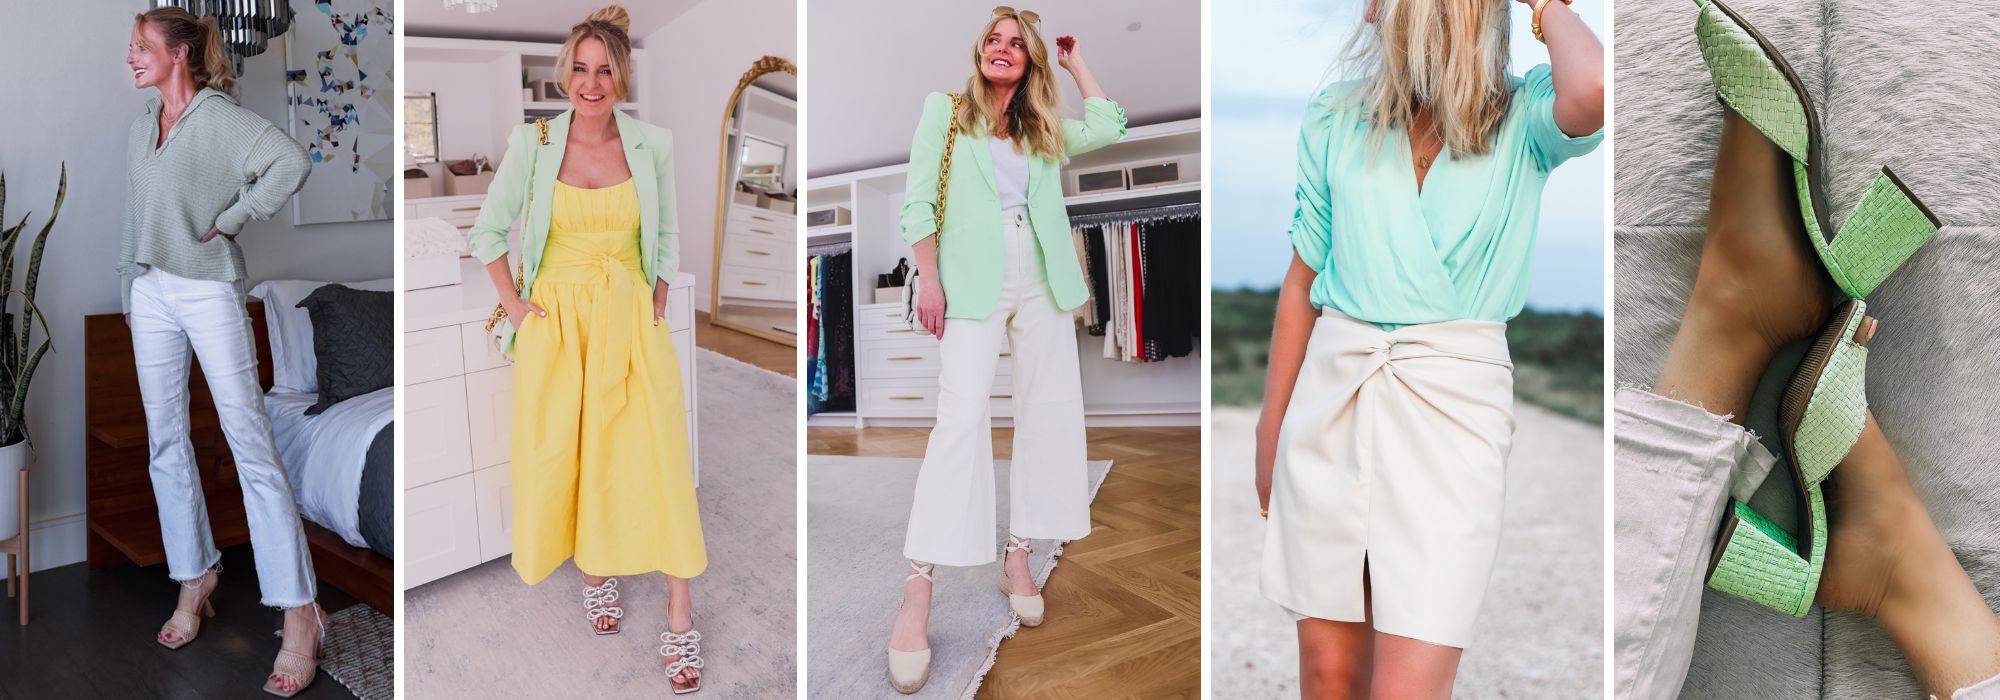 mint green spring fashion, mint green trend, color trend, mint green color trend, mint green fashion finds, mint green finds, mint green over 40, how to wear mint green, what colors go with mint green, best mint green fashion, erin busbee, busbee style, fashion over 40